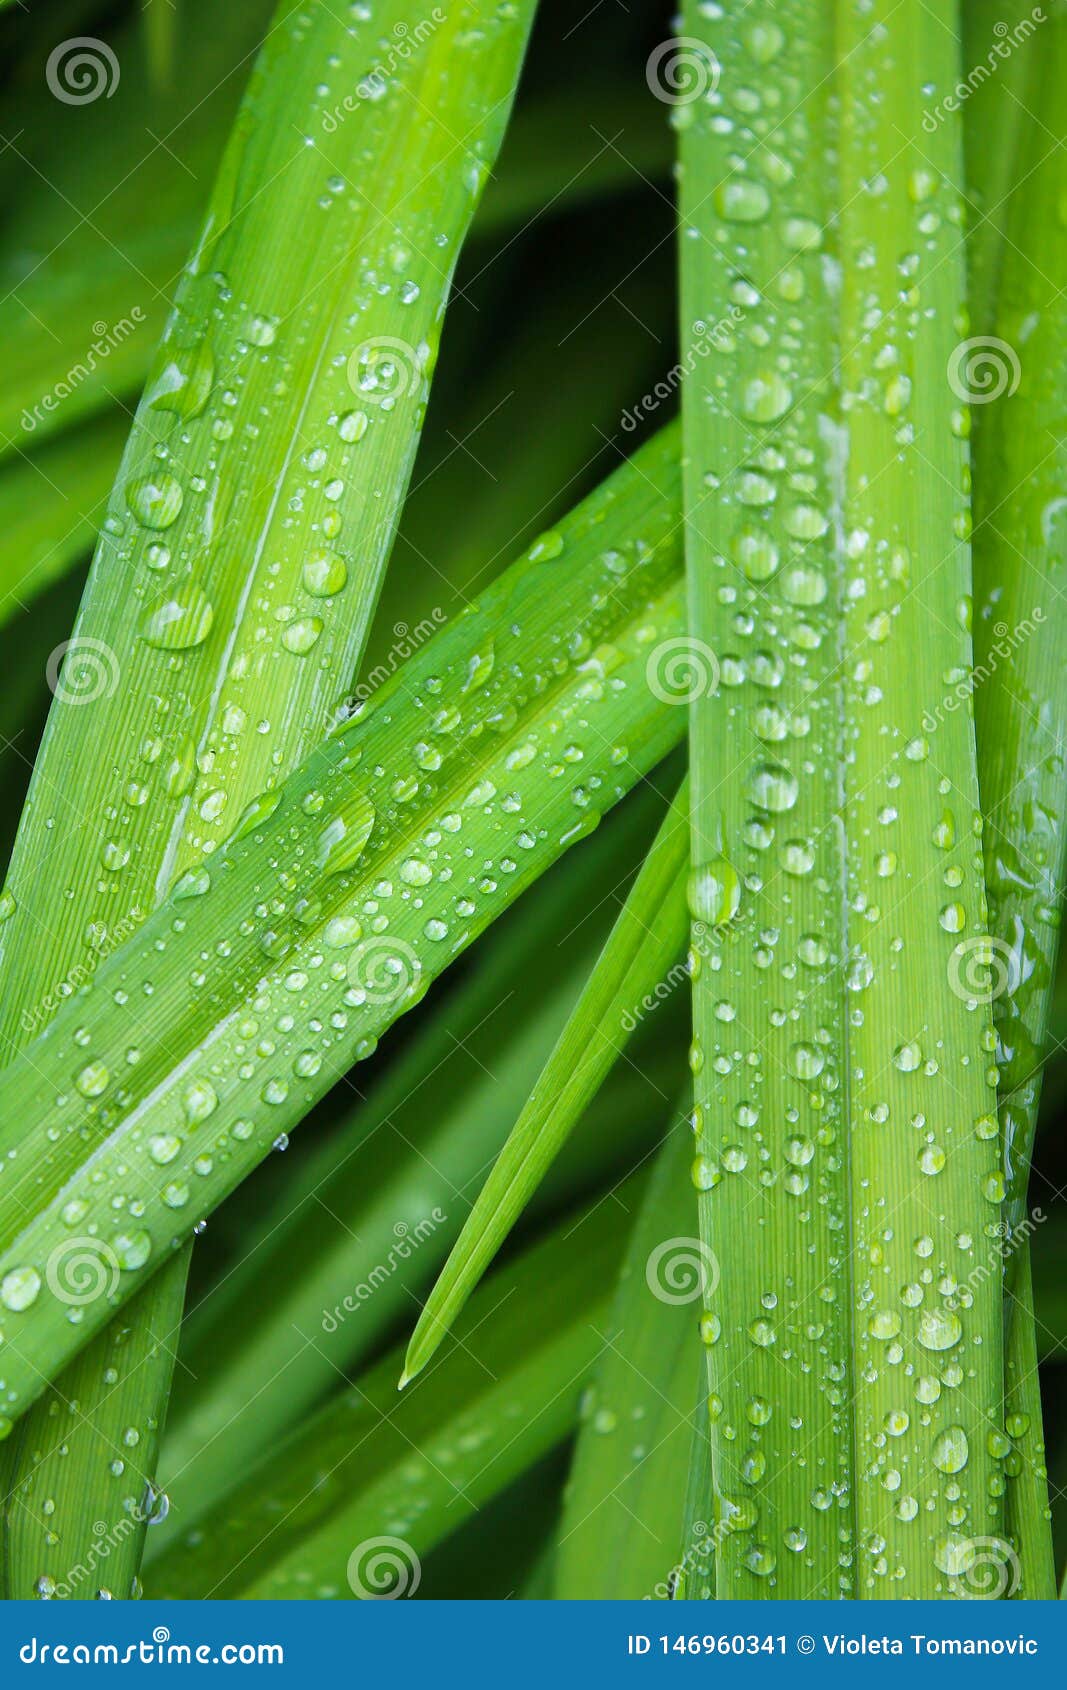 drops, droplets of rain, water on the leaves of wild crin